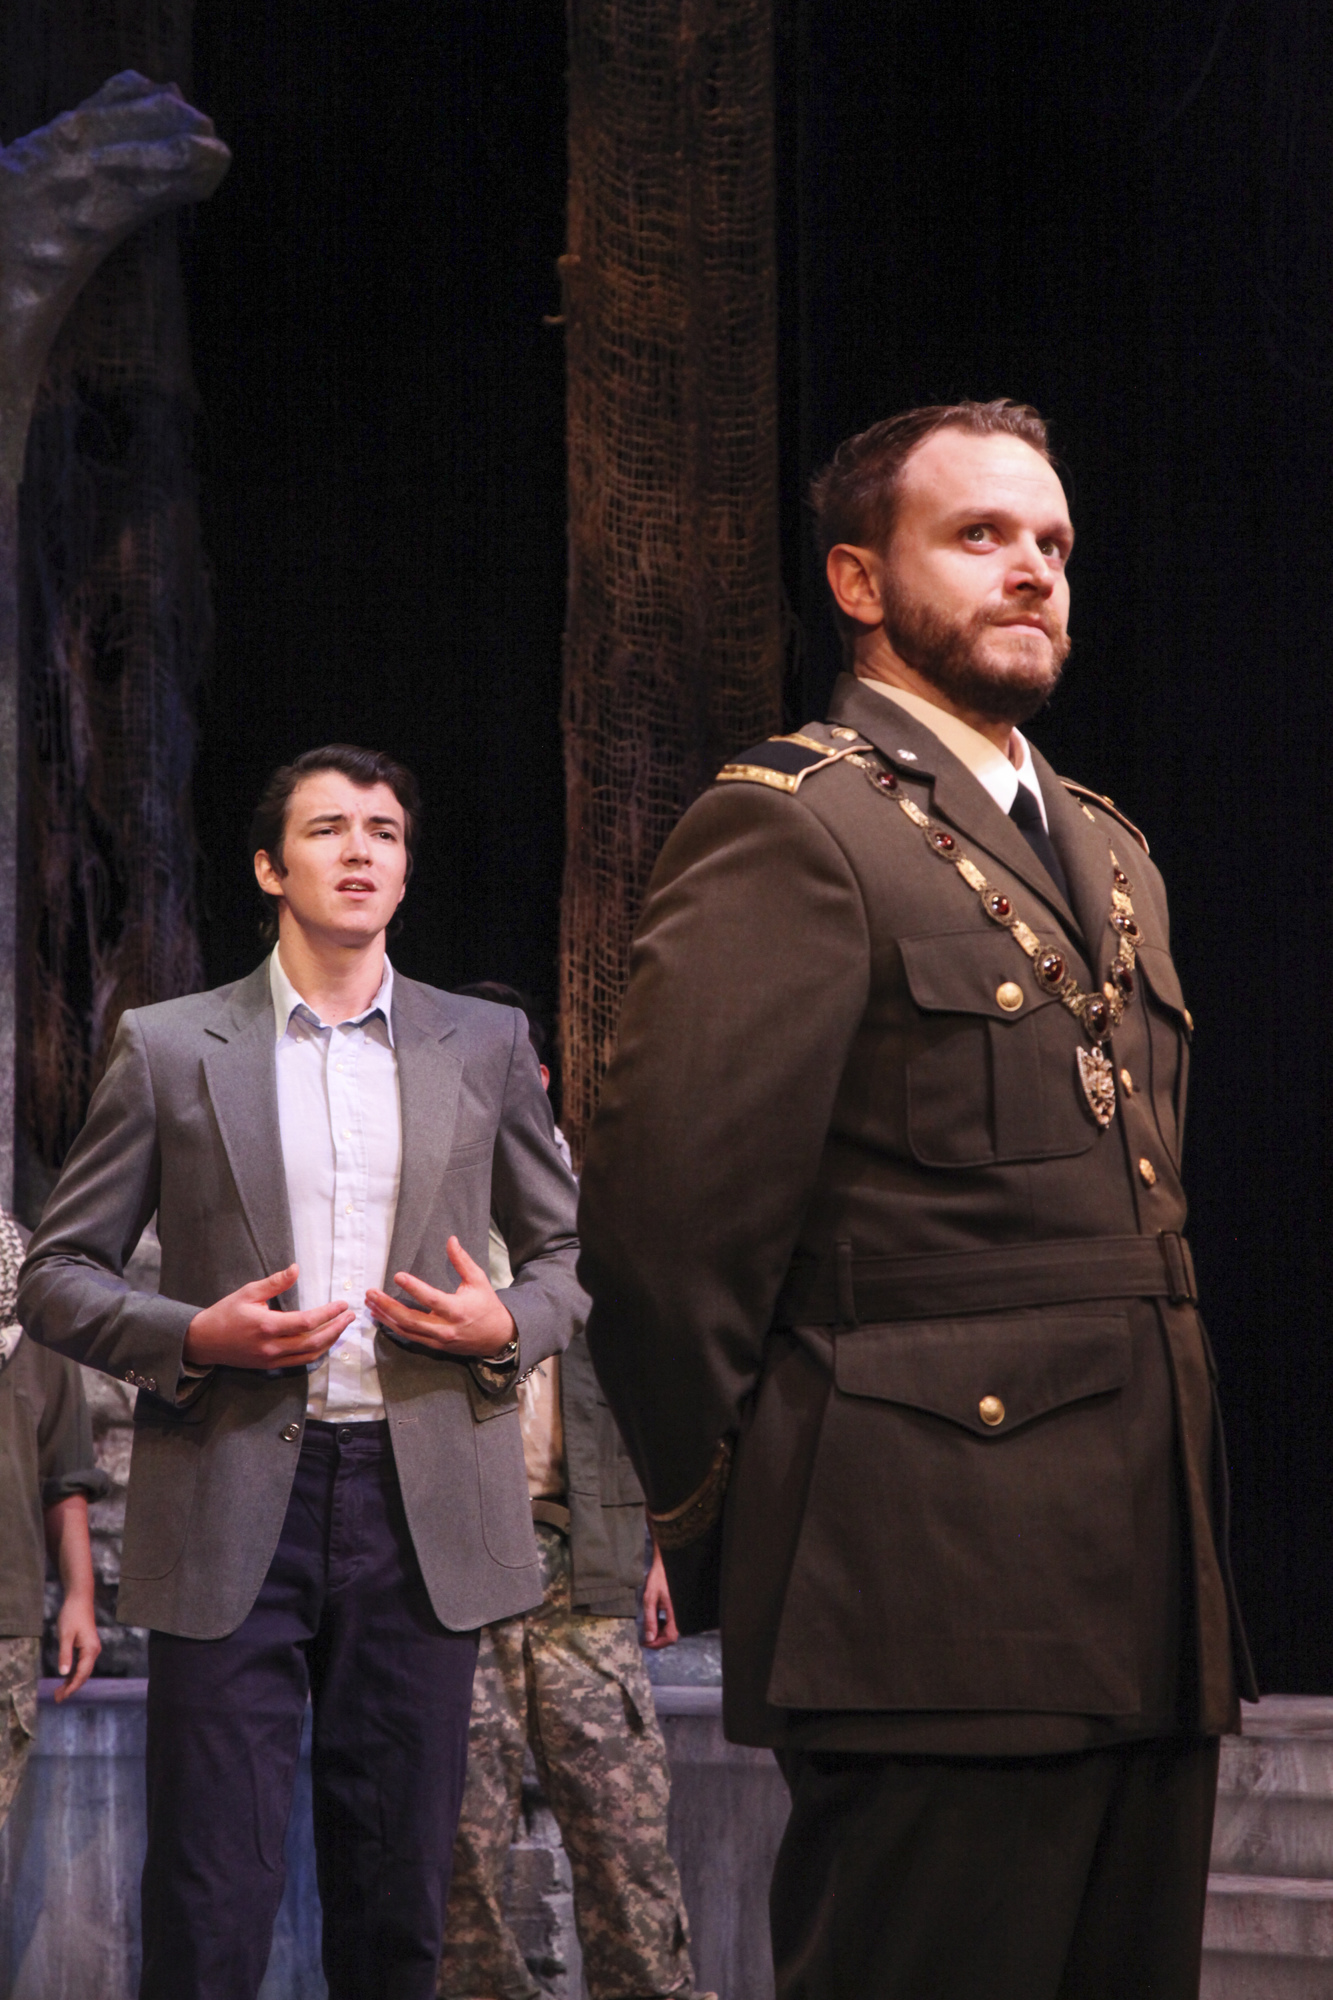 Liam O’Brien portrays Haemon, and Christopher Hayhurst is King Creon.